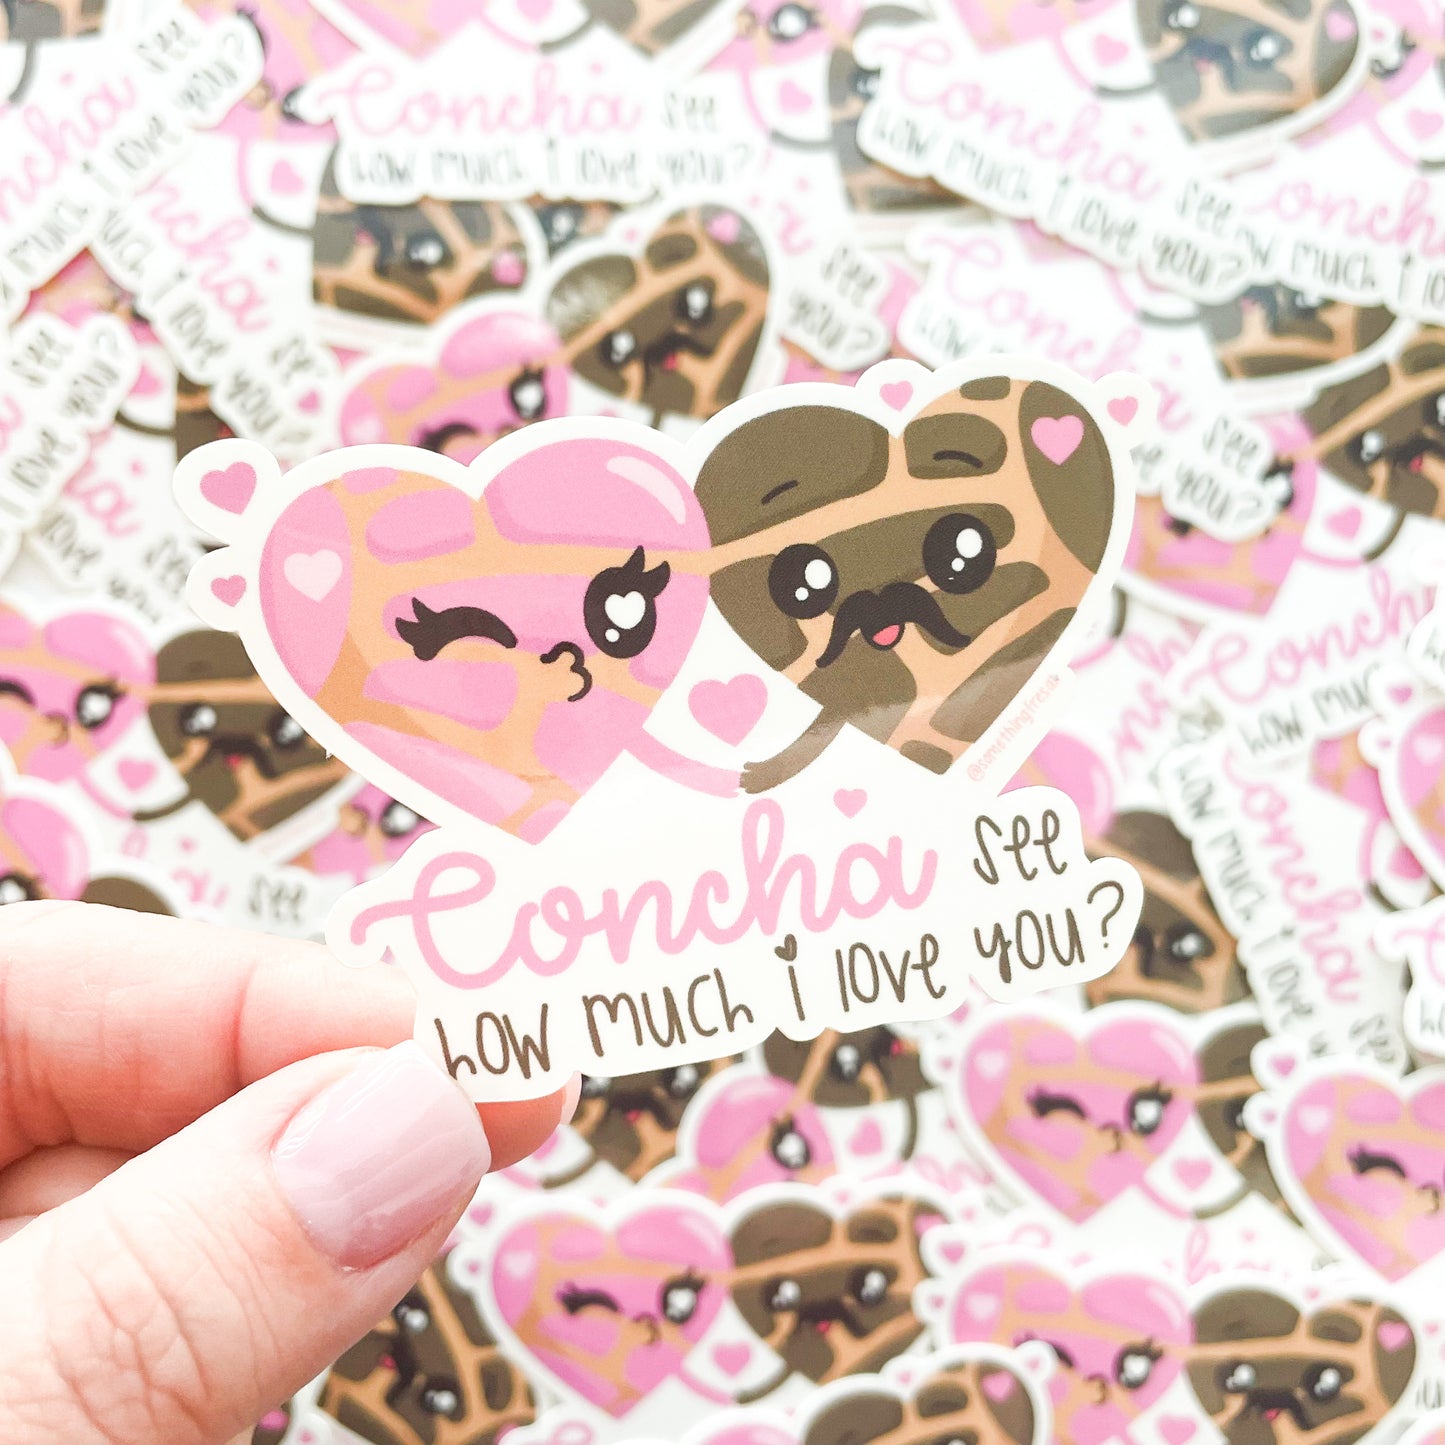 Concha see how much I love you? Sticker